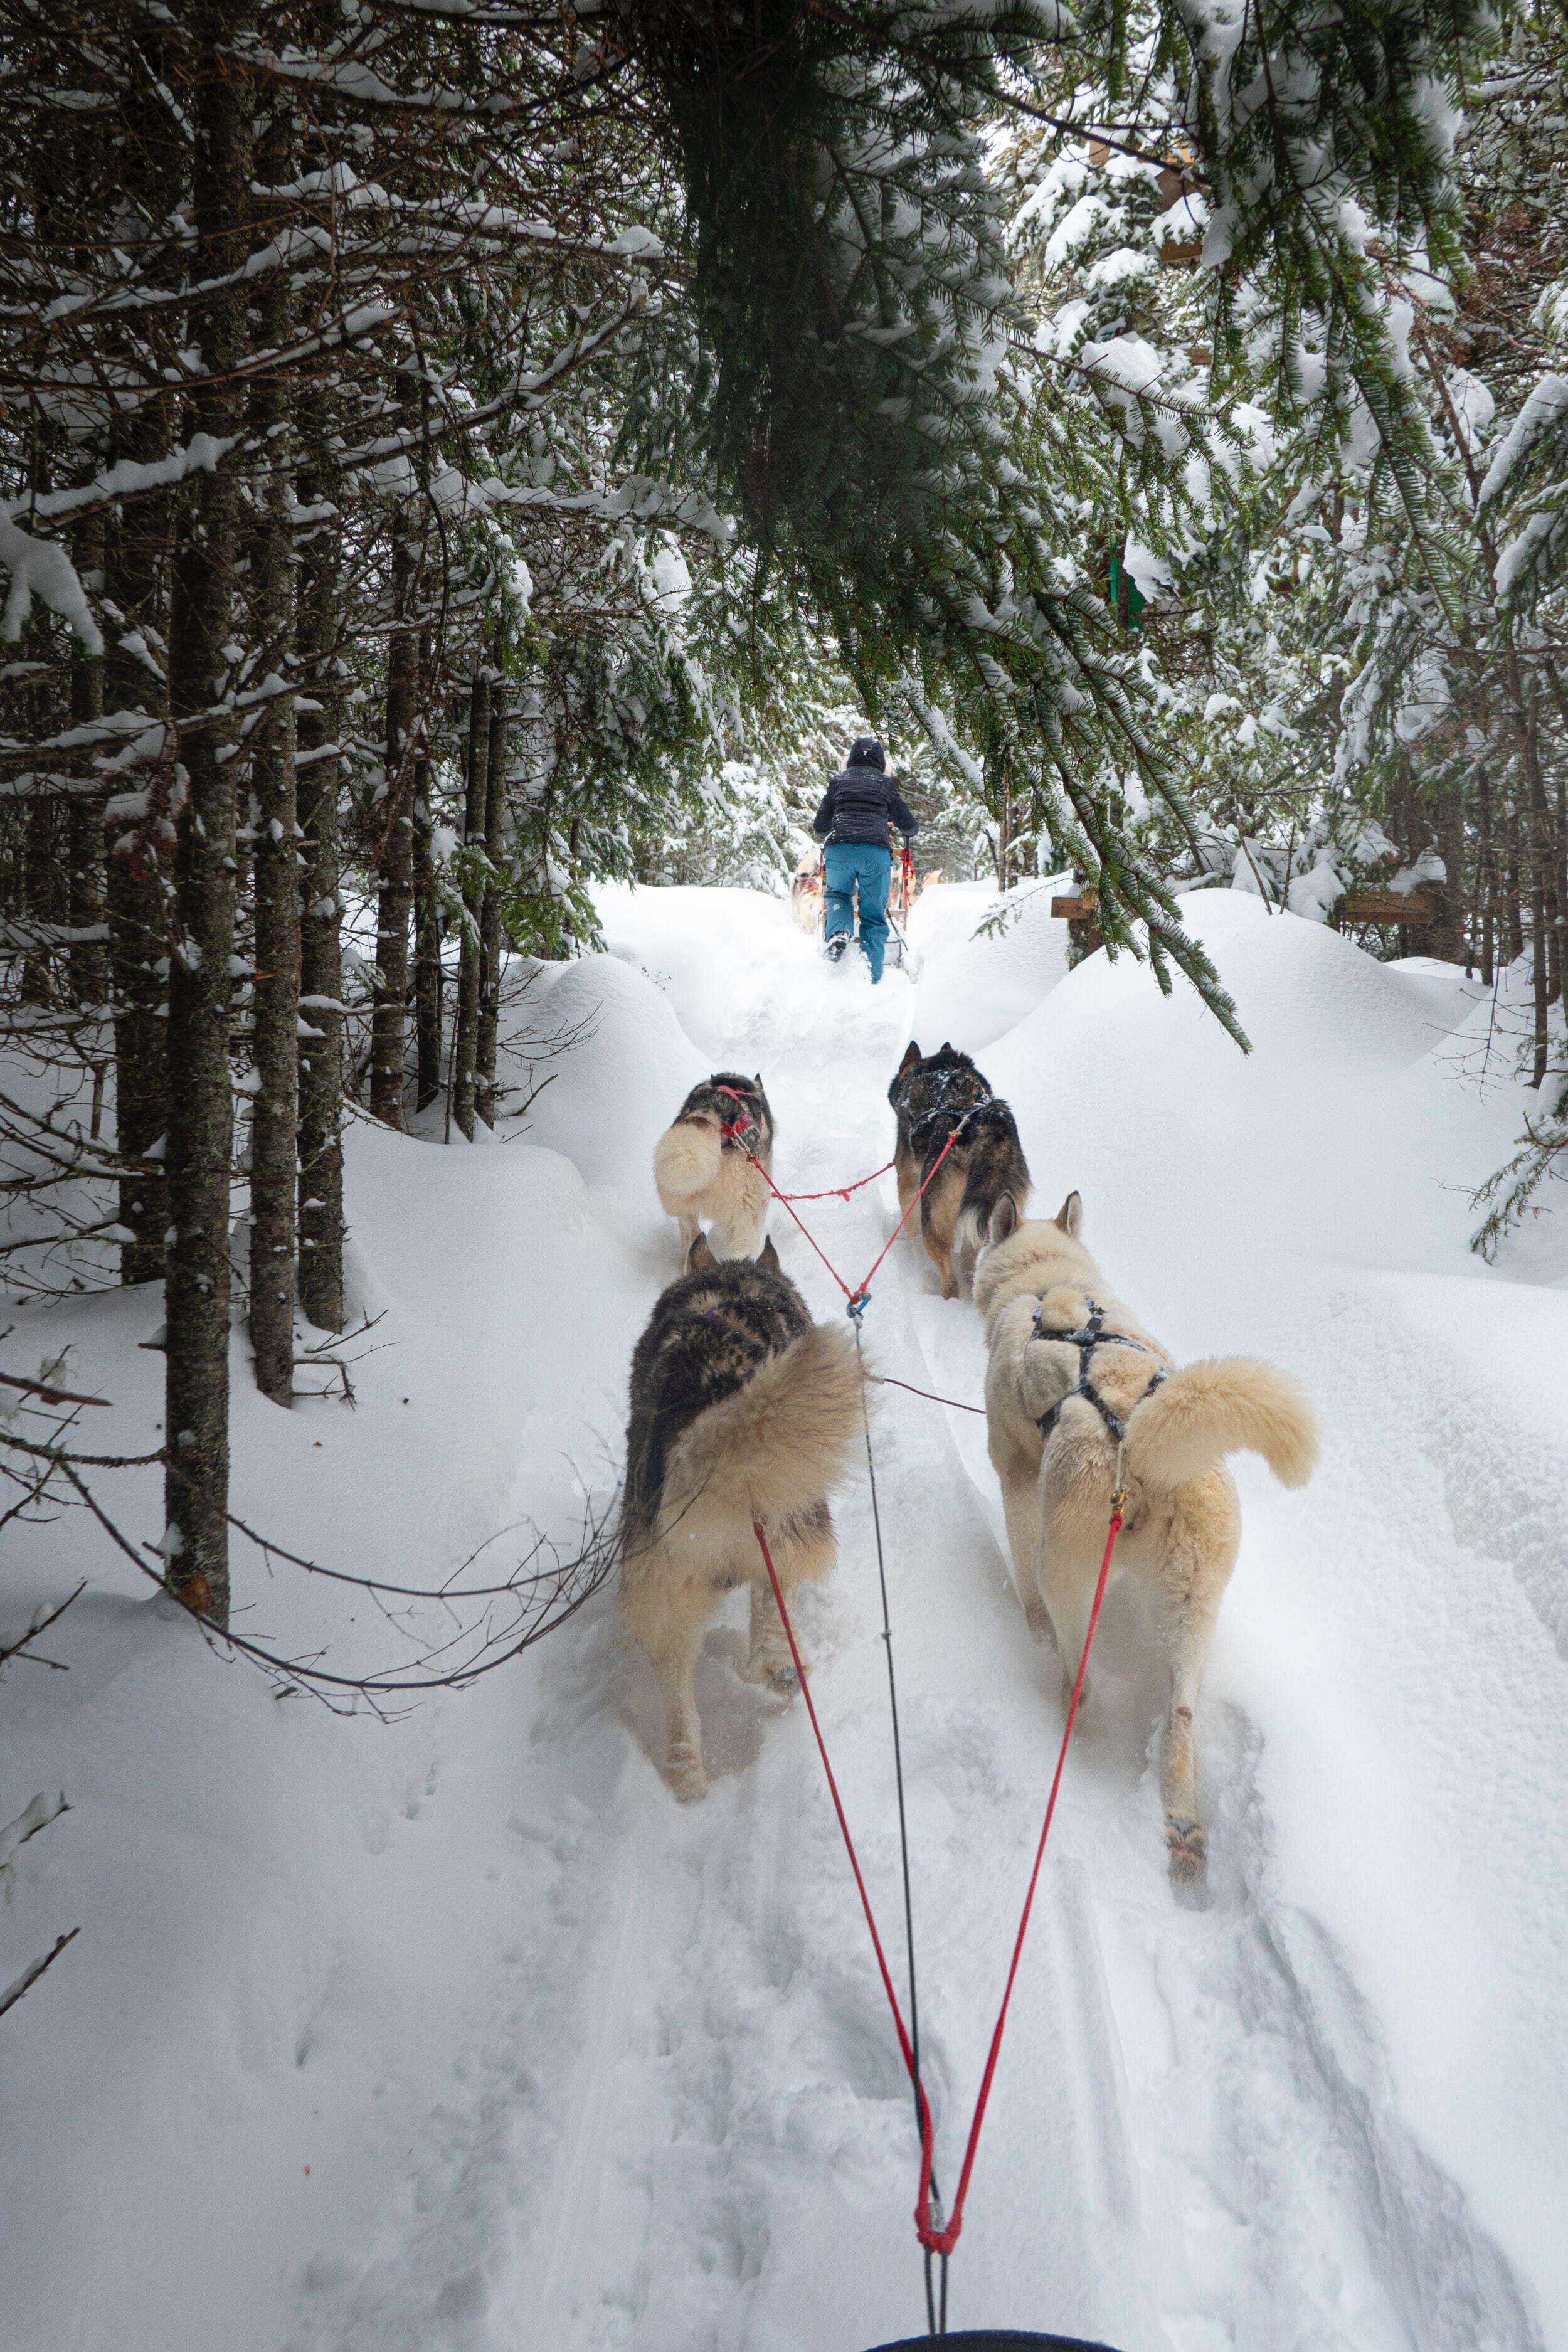 A pack of dogs pulling a sled in a snowy forest